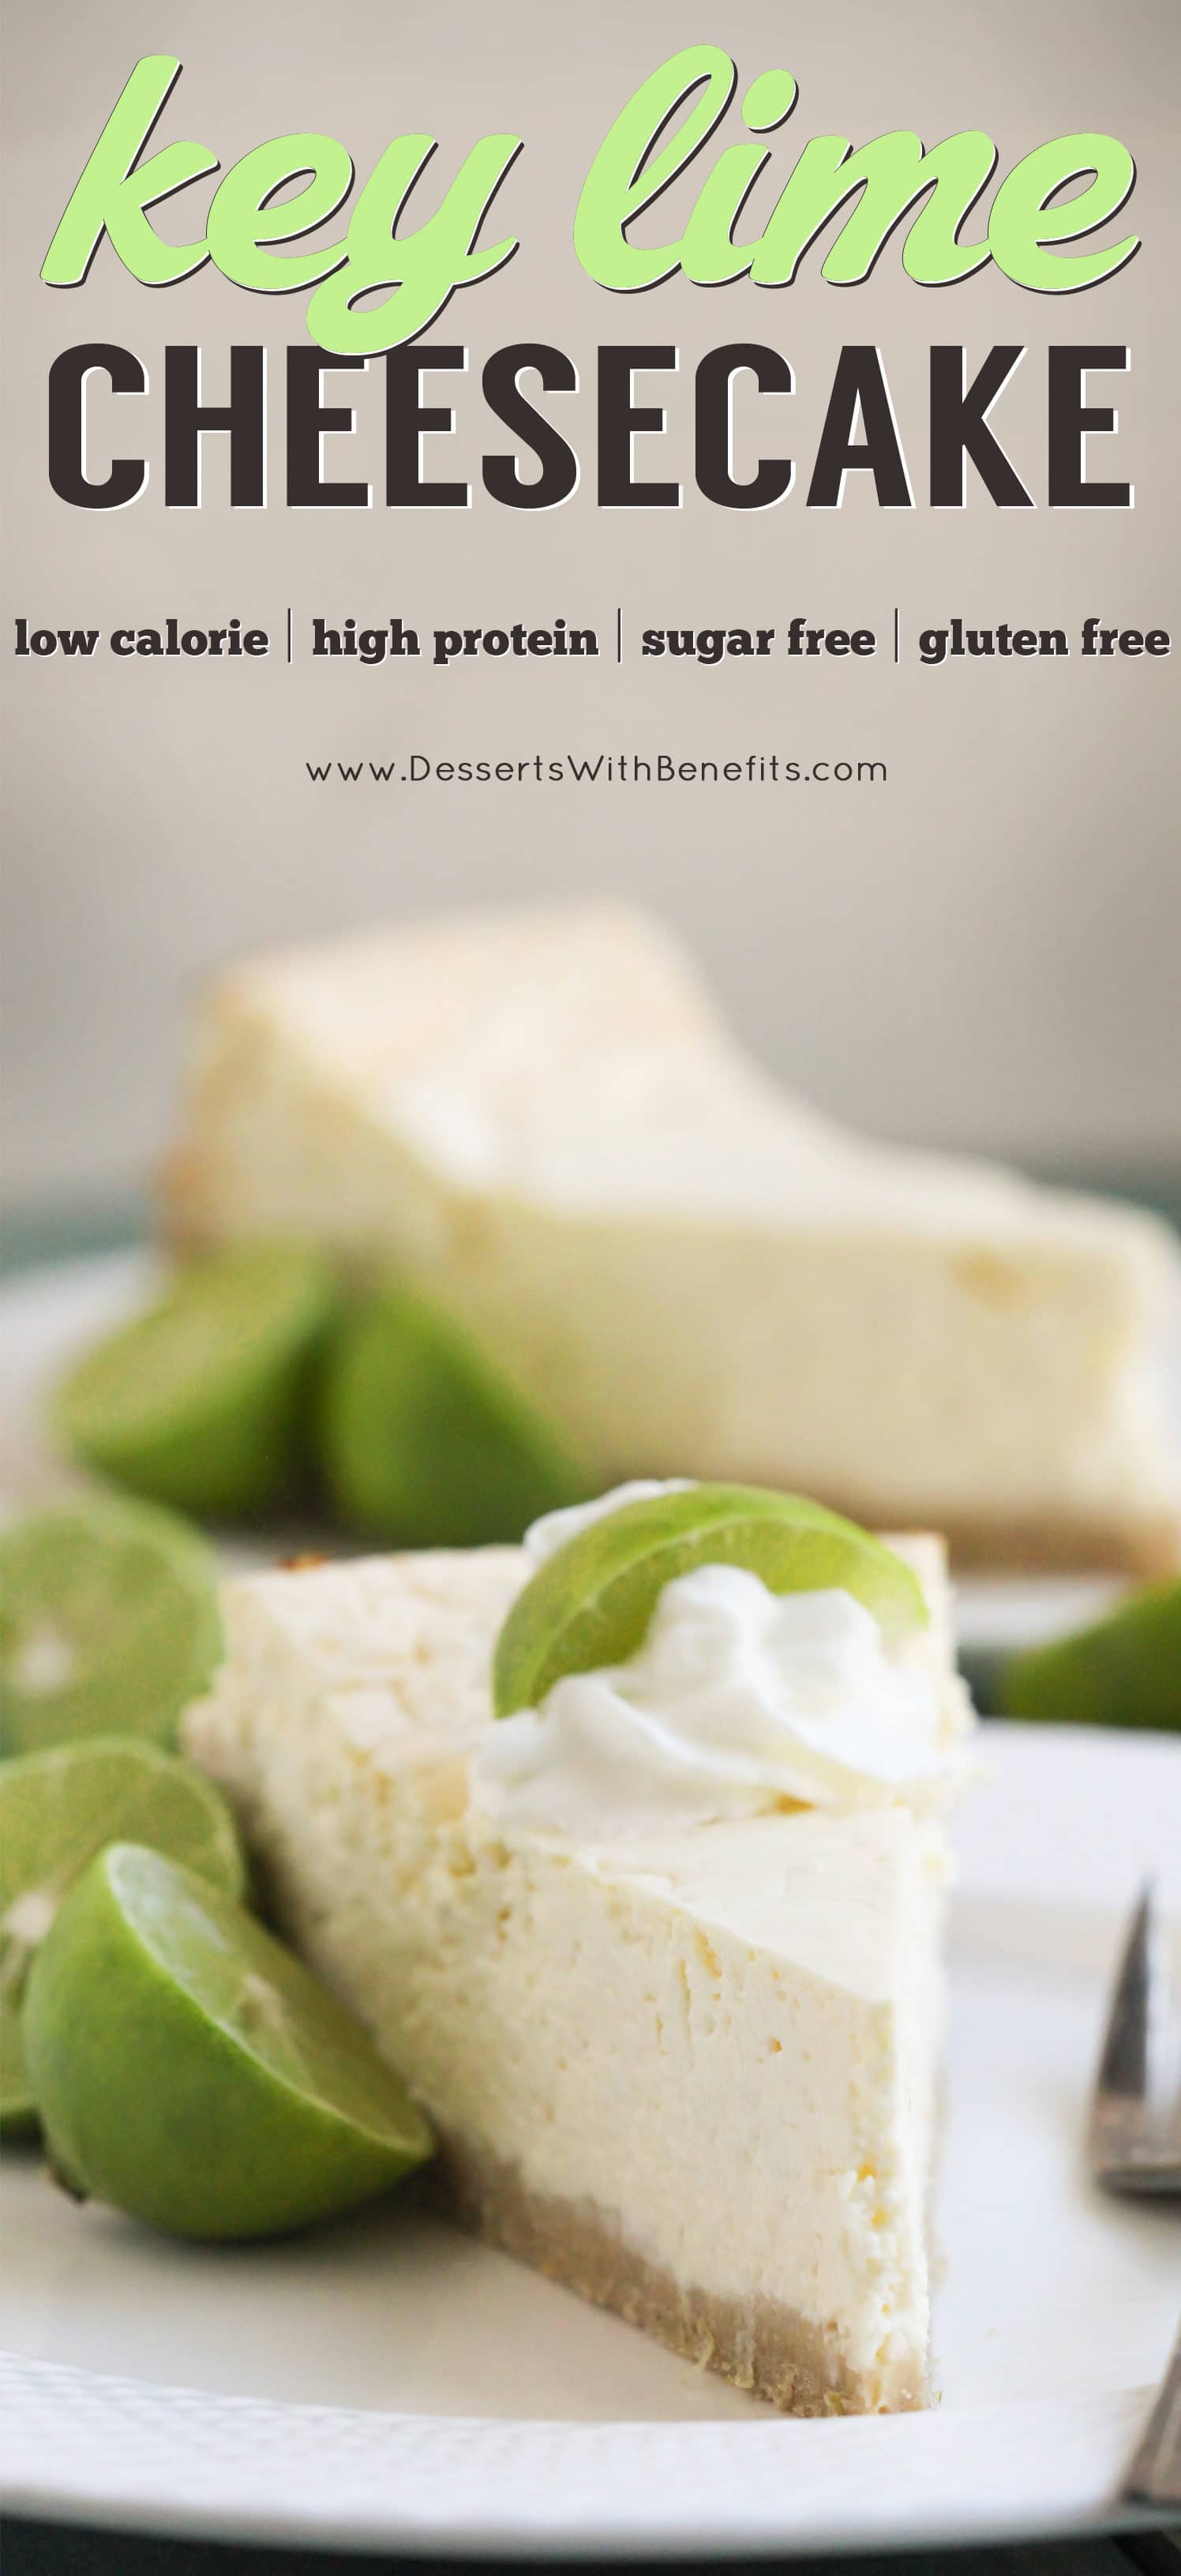 This Healthy Key Lime Cheesecake tastes like Key Lime Pie but in CHEESECAKE form! Each bite is sweet, refreshing, and delicious, you'd never suspect it's sugar free, gluten free, and high protein. -- Healthy Dessert Recipes with sugar free, low calorie, low fat, high protein, gluten free, dairy free and vegan options at the Desserts With Benefits Blog (www.DessertsWithBenefits.com)